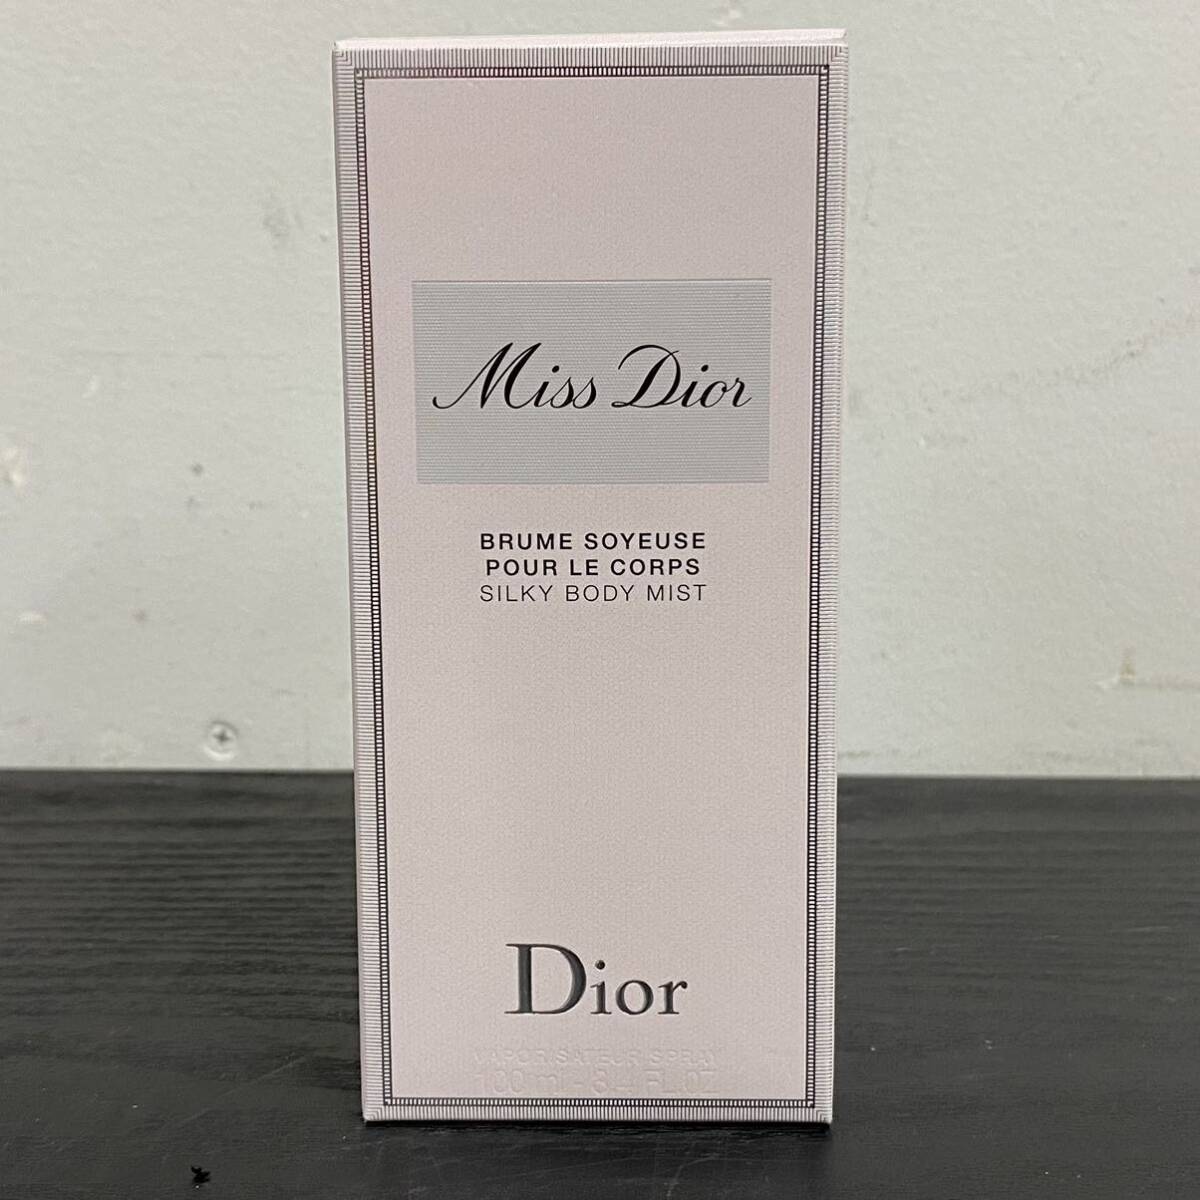 VV201 cosme remainder 9 break up and more Dior DIOR mistake Dior silky body Mist body for face lotion 100ml Miss Dior BCAR Miss Dior 100ml